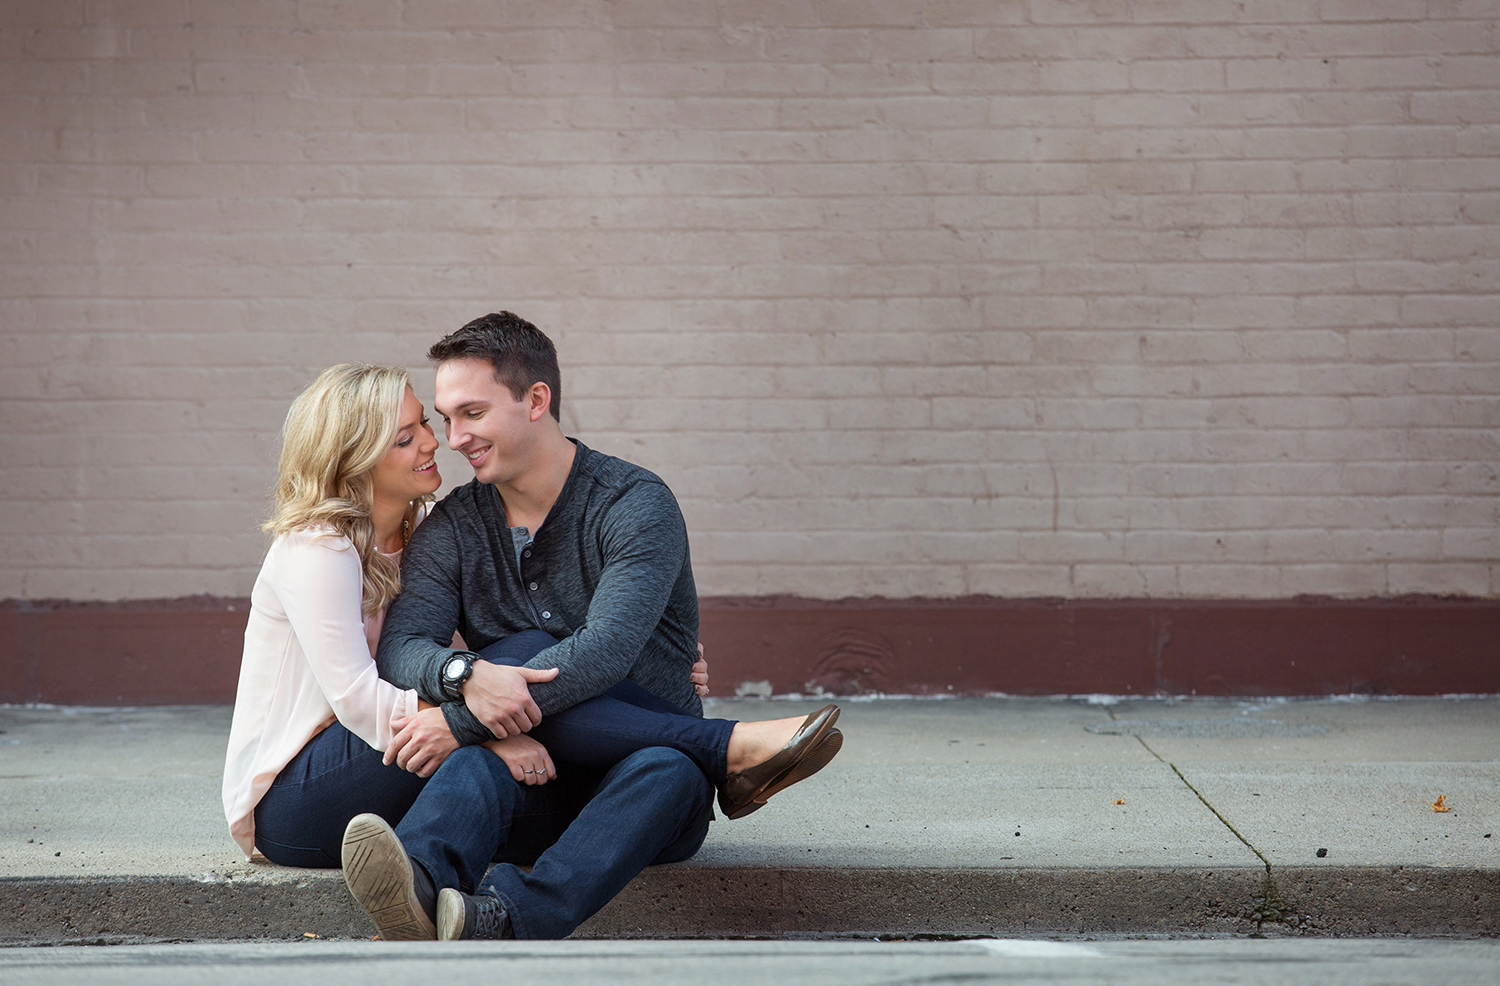  Greenville Ohio, real engagement photography, emotional photography, modern engagement photography, lovestory 